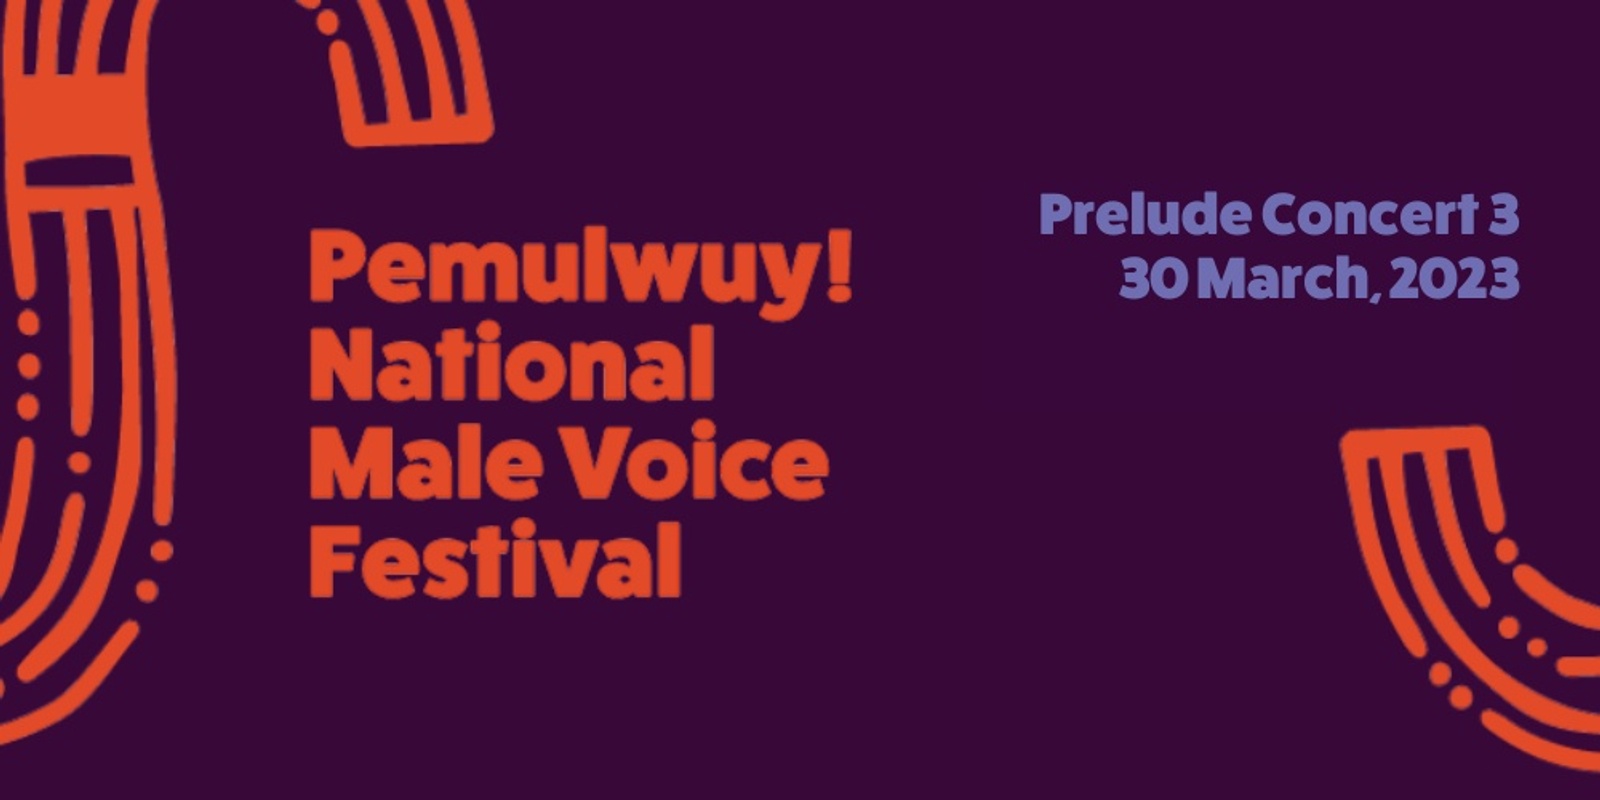 Banner image for Pemulwuy Prelude Concert 3 - Virtual